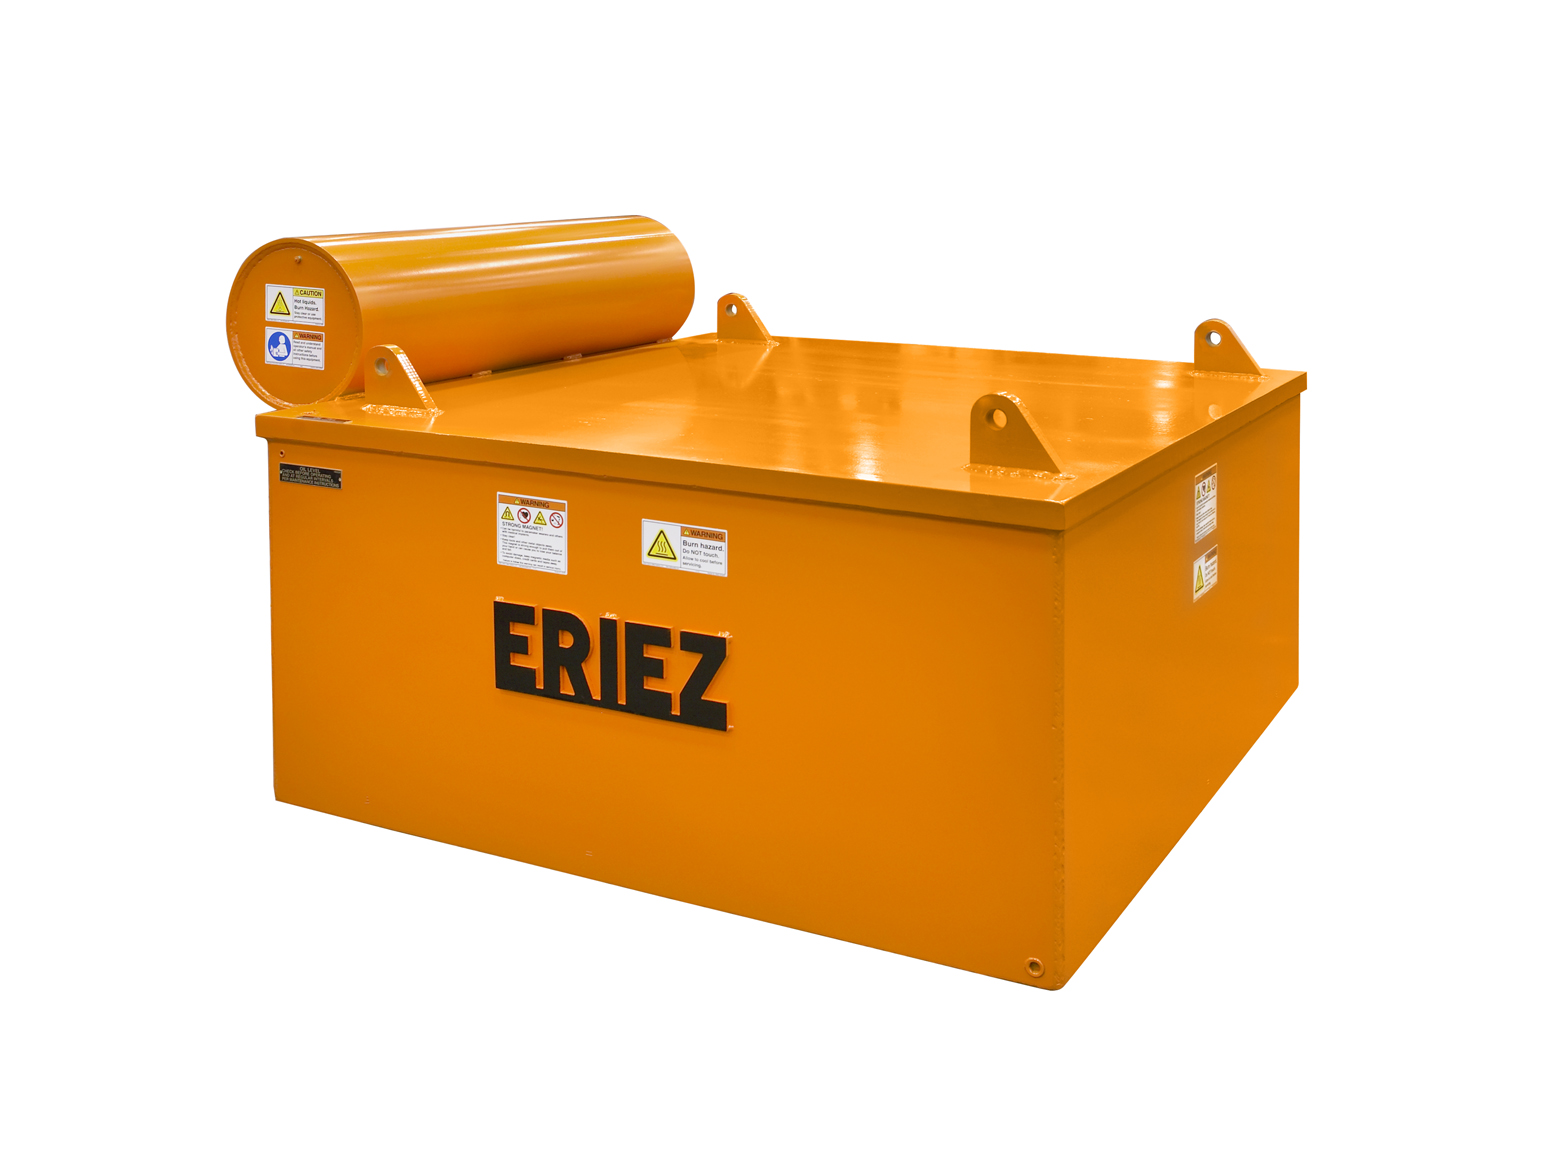 Eriez Suspended Magnets Protect Critical Equipment - Rock Products Magazine